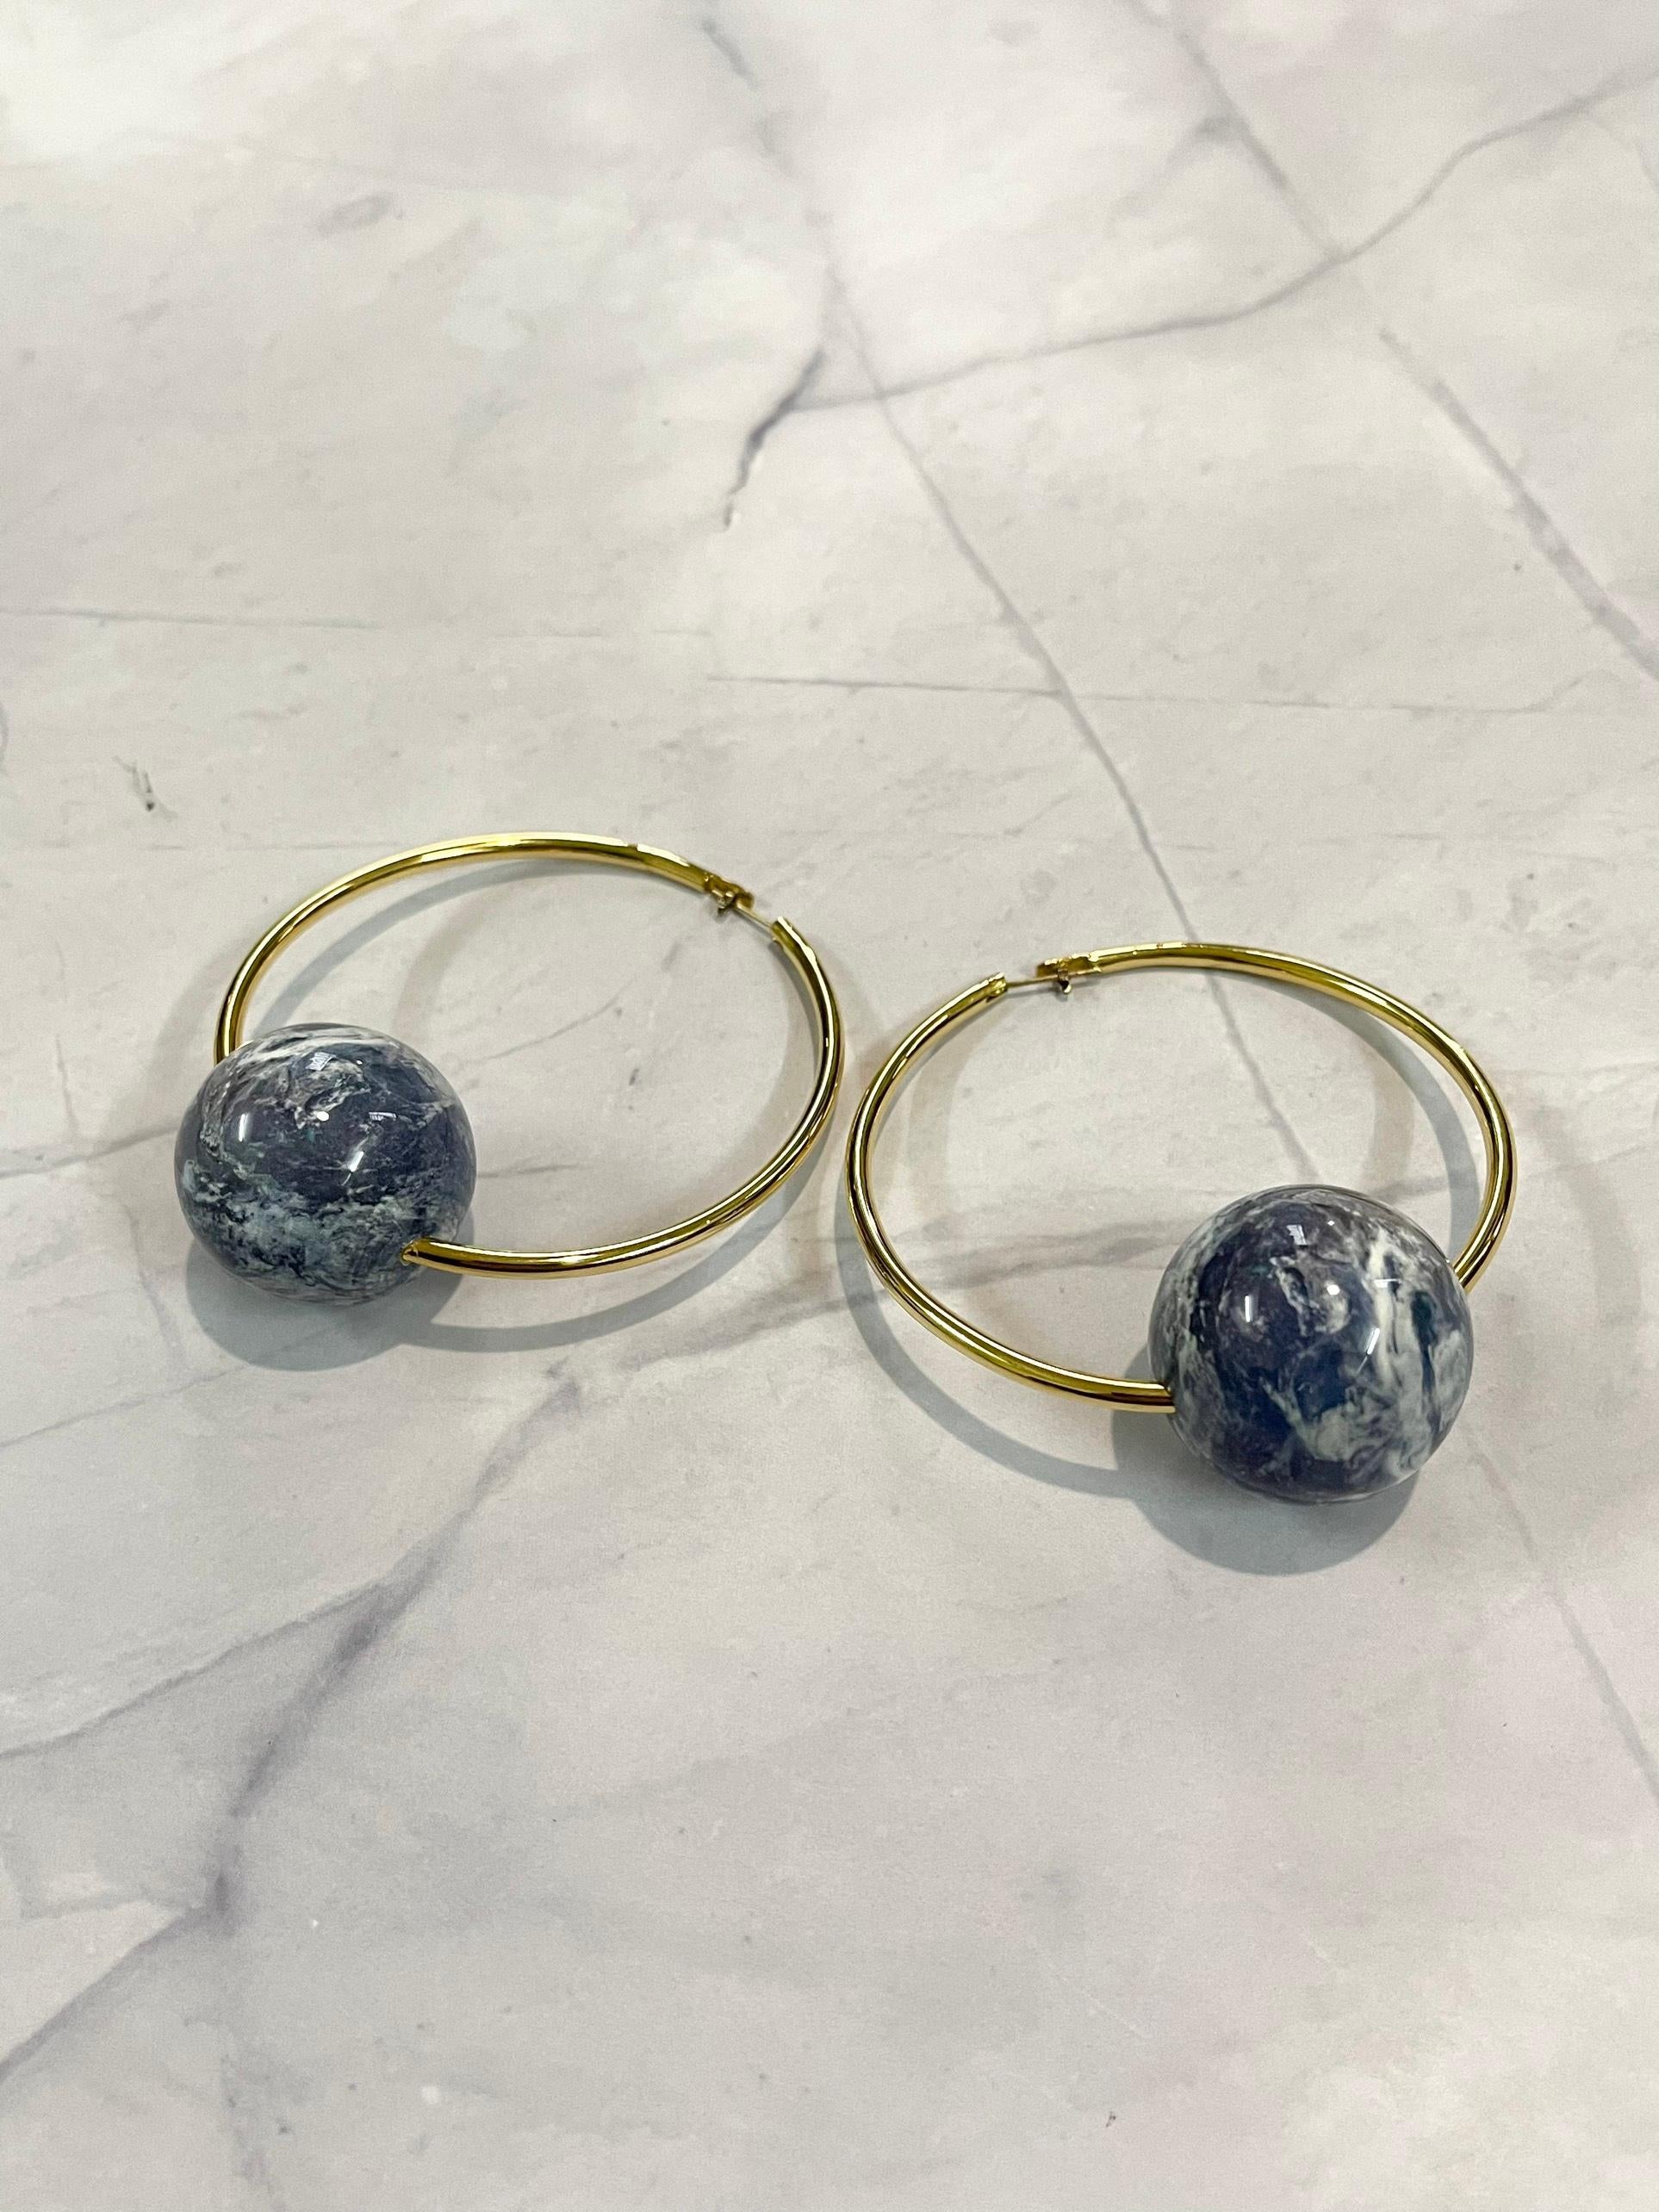 Undercover Earth Hoop Earrings In Excellent Condition For Sale In Tương Mai Ward, Hoang Mai District